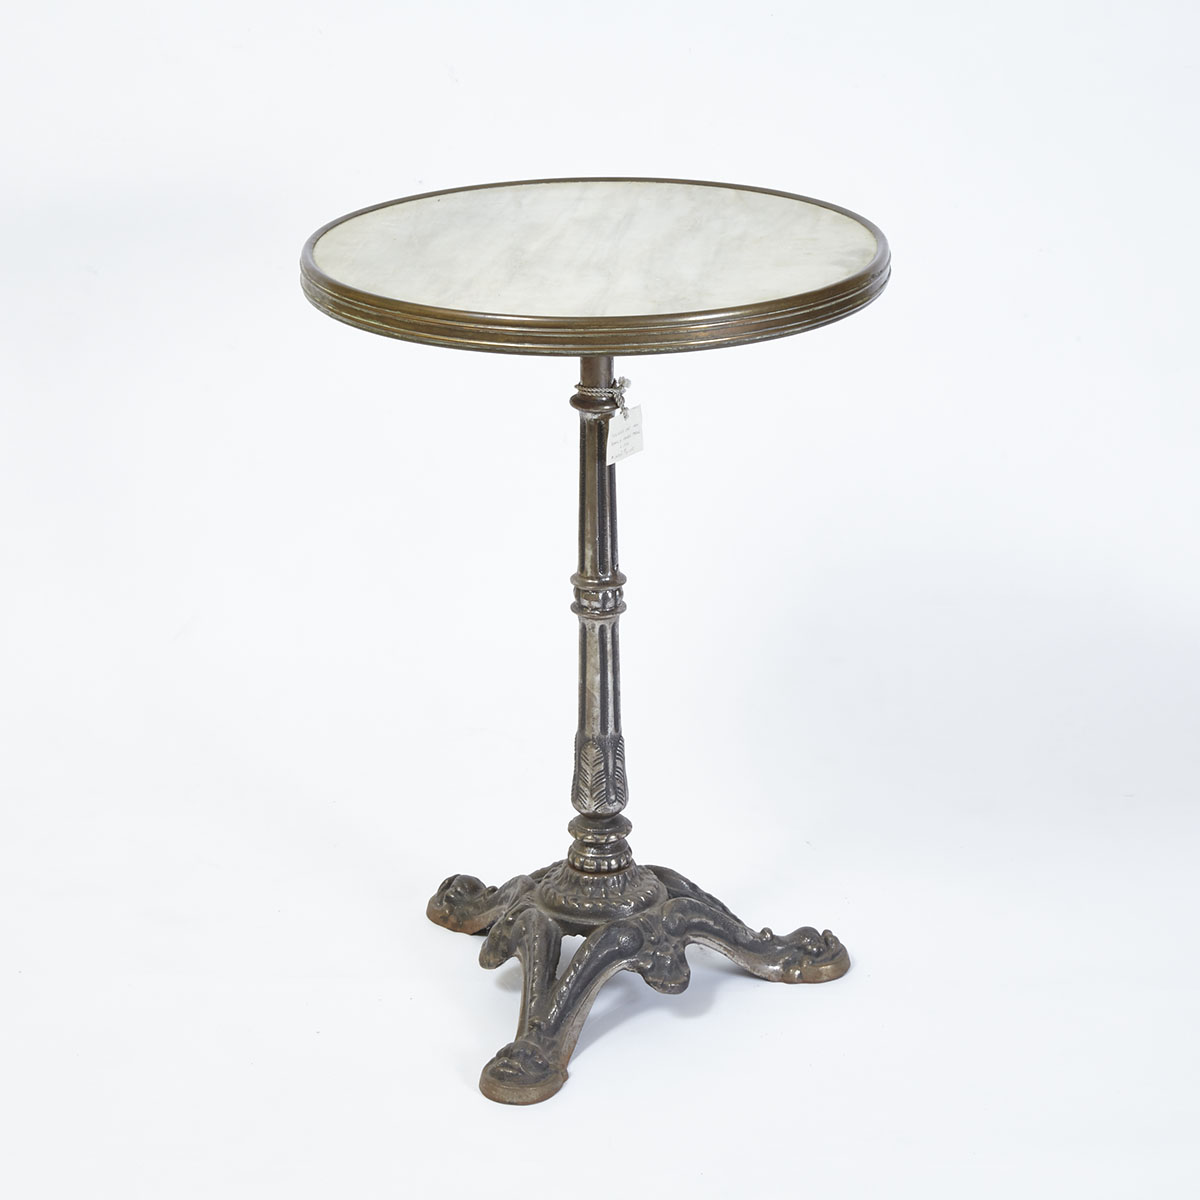 Late Victorian Cast Iron Marble Top Lamp Table, late 19th century